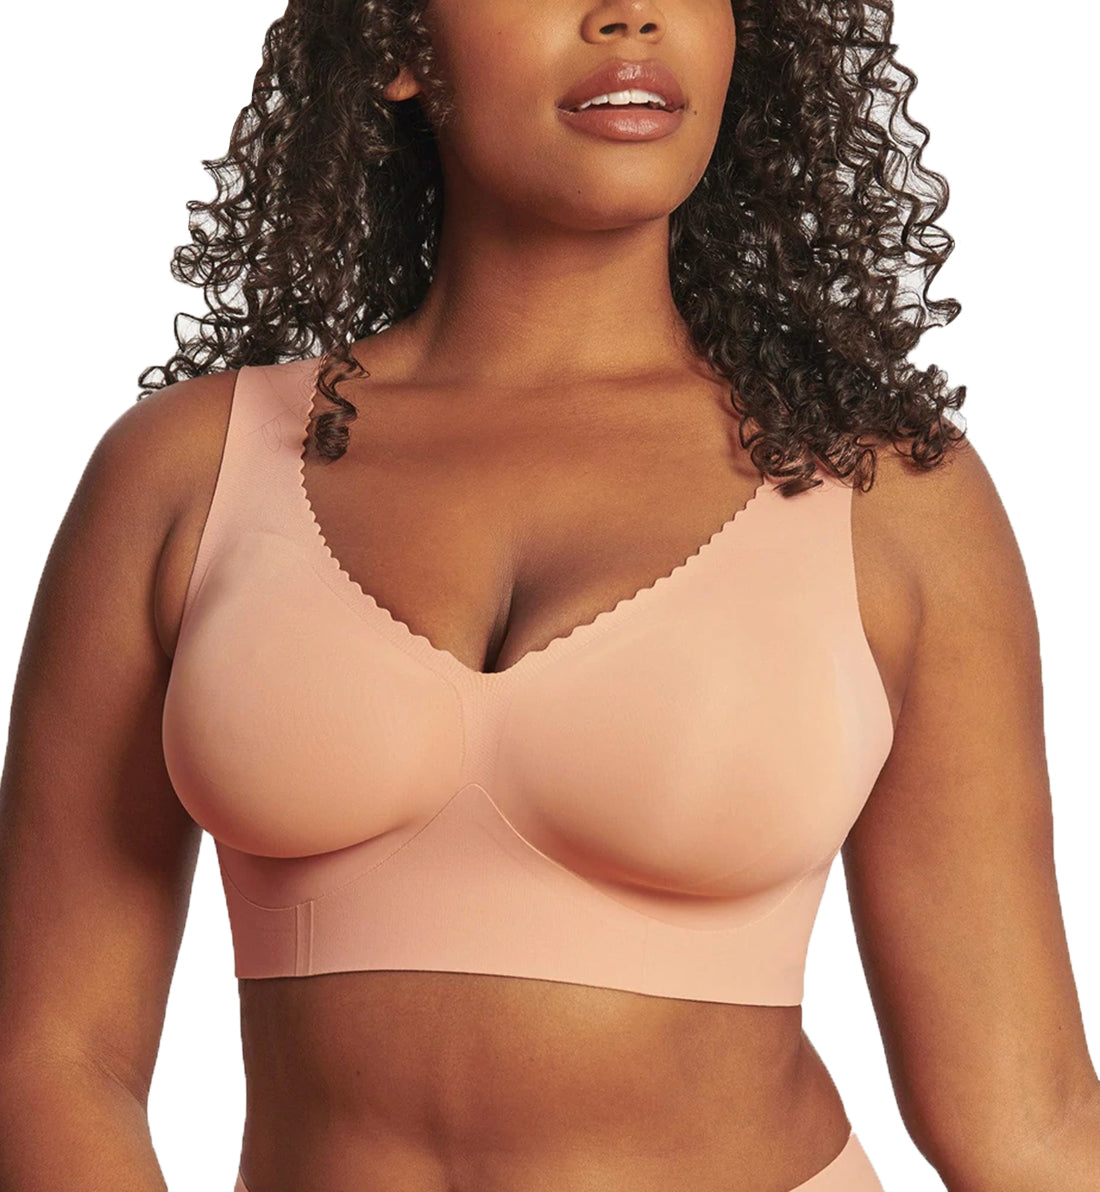 Buy Women's Wireless Padded Bra Top Everyday Basic V-Neck Size(28 Till 34)  Assorted Colour Pack of 1 Online In India At Discounted Prices